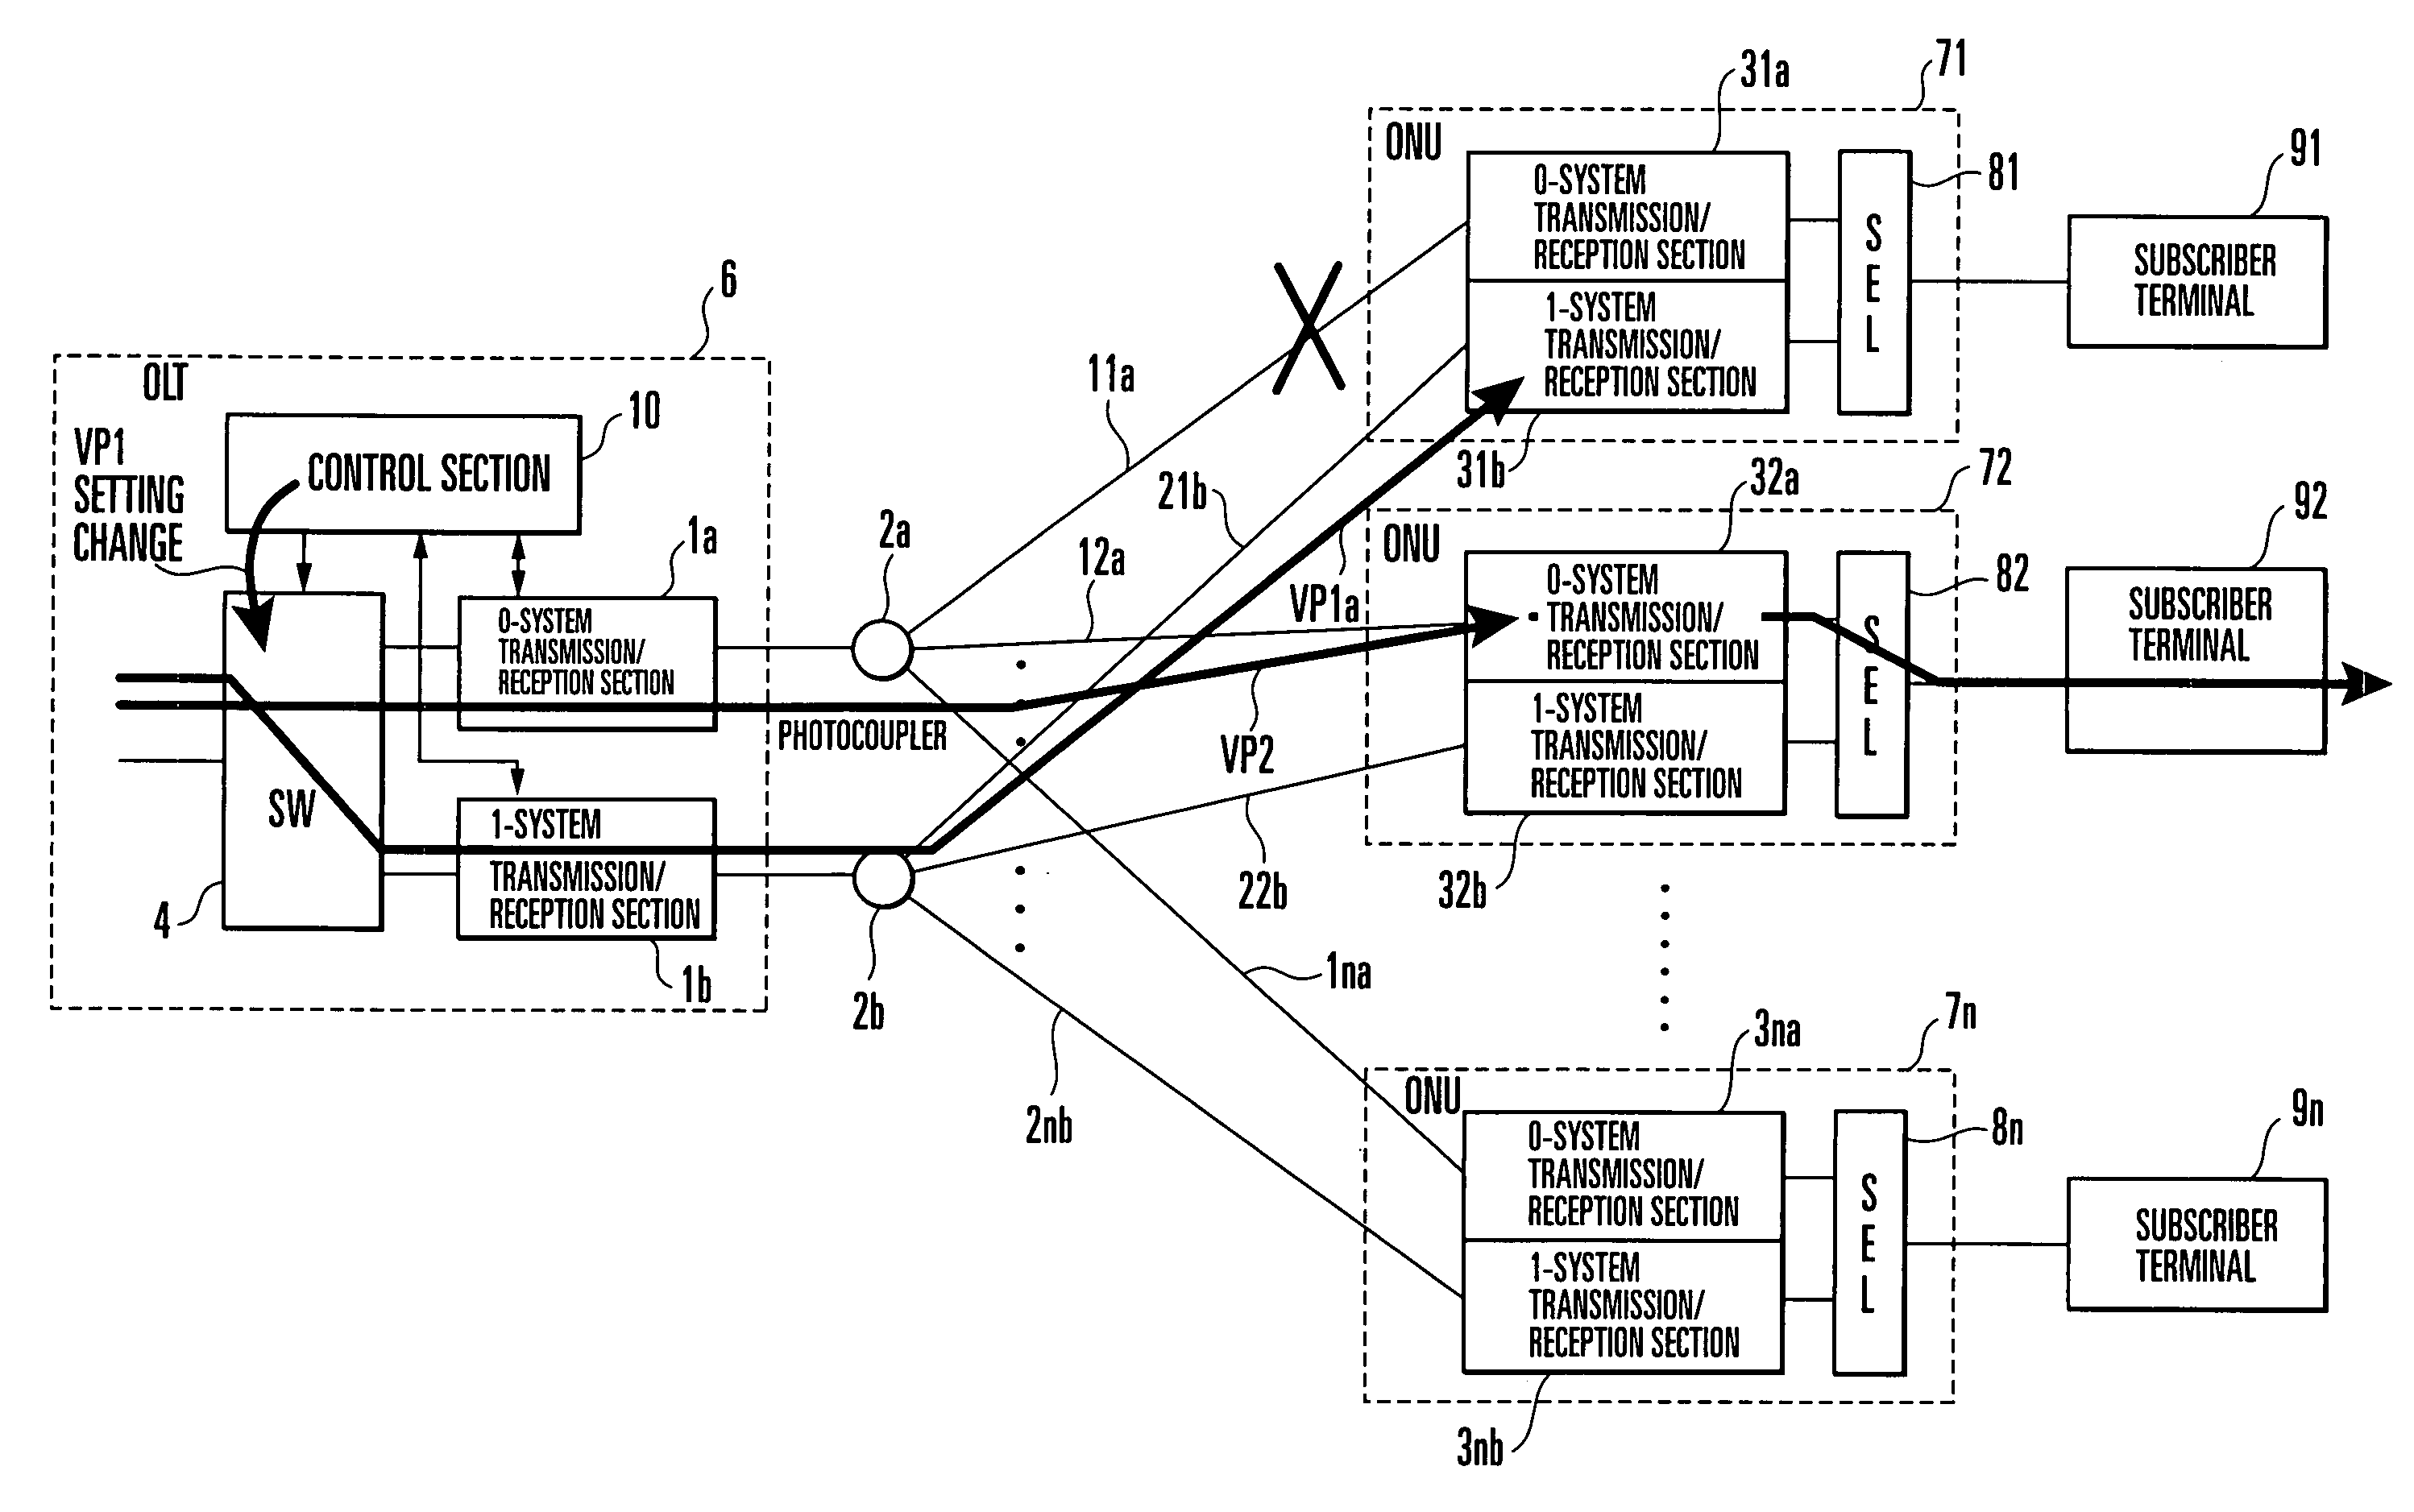 Protection switching method and apparatus for passive optical network system